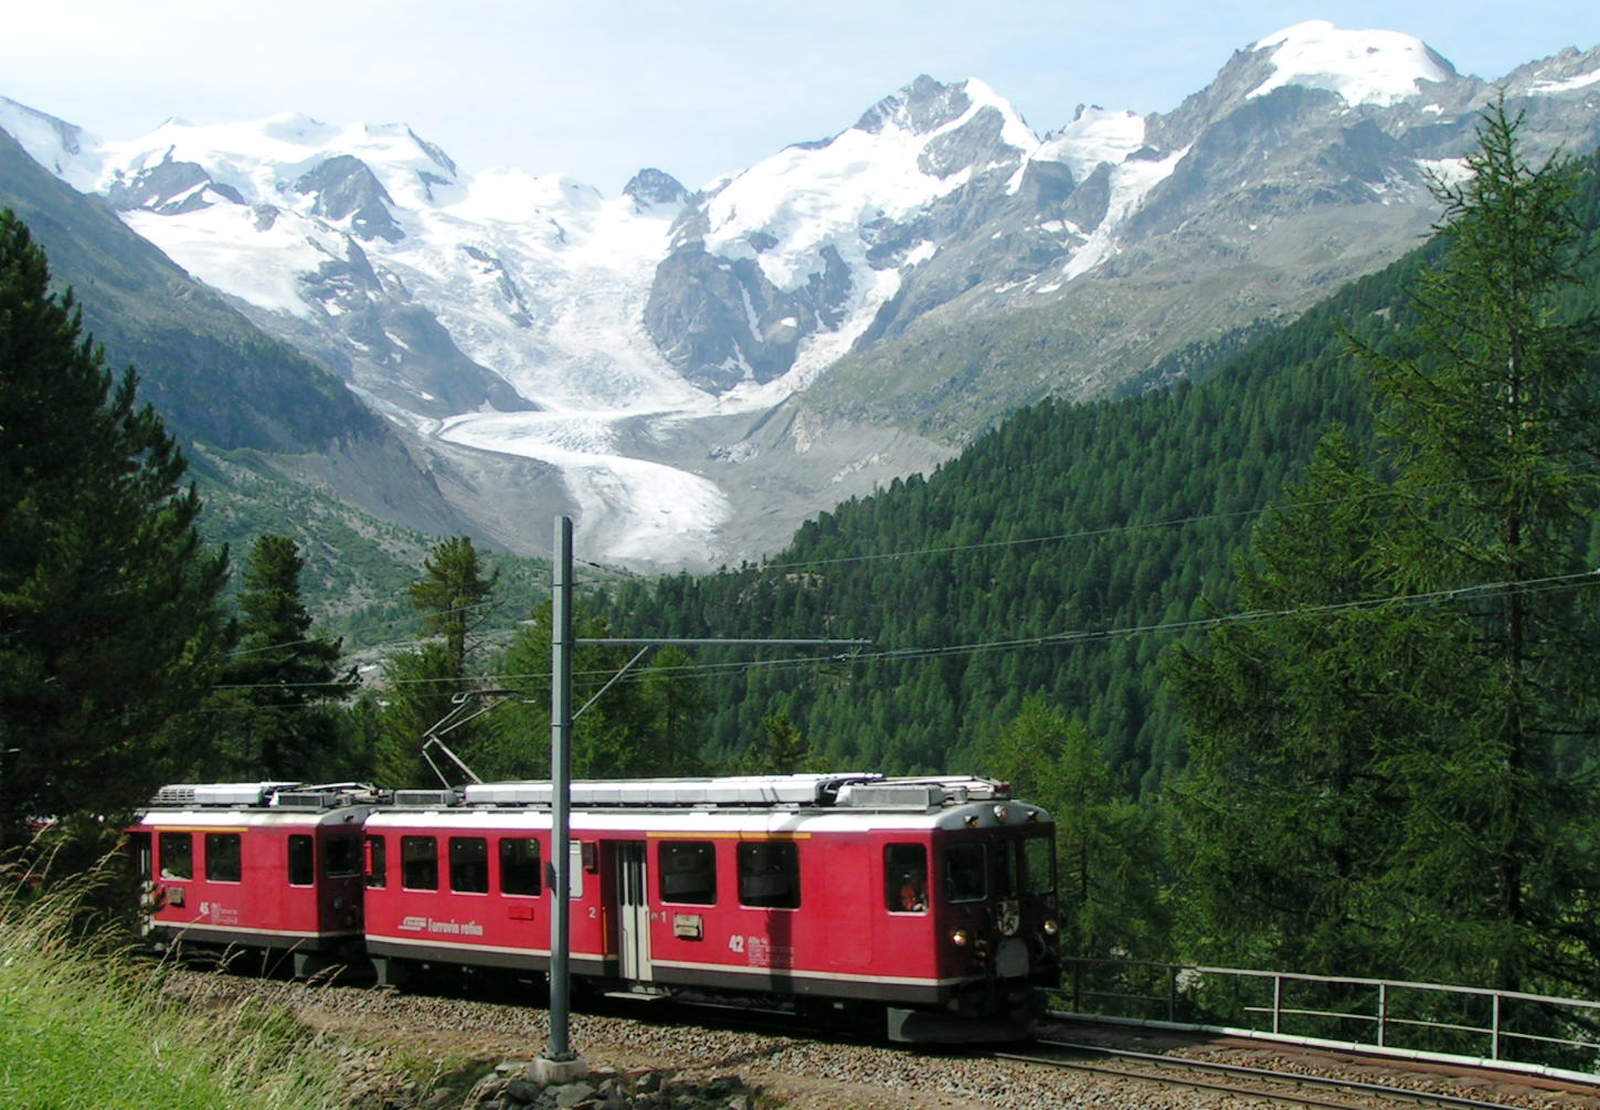 Two ABe 4/4 II in August 2004 on the Bernina Railway in front of the Morteratsch Glacier